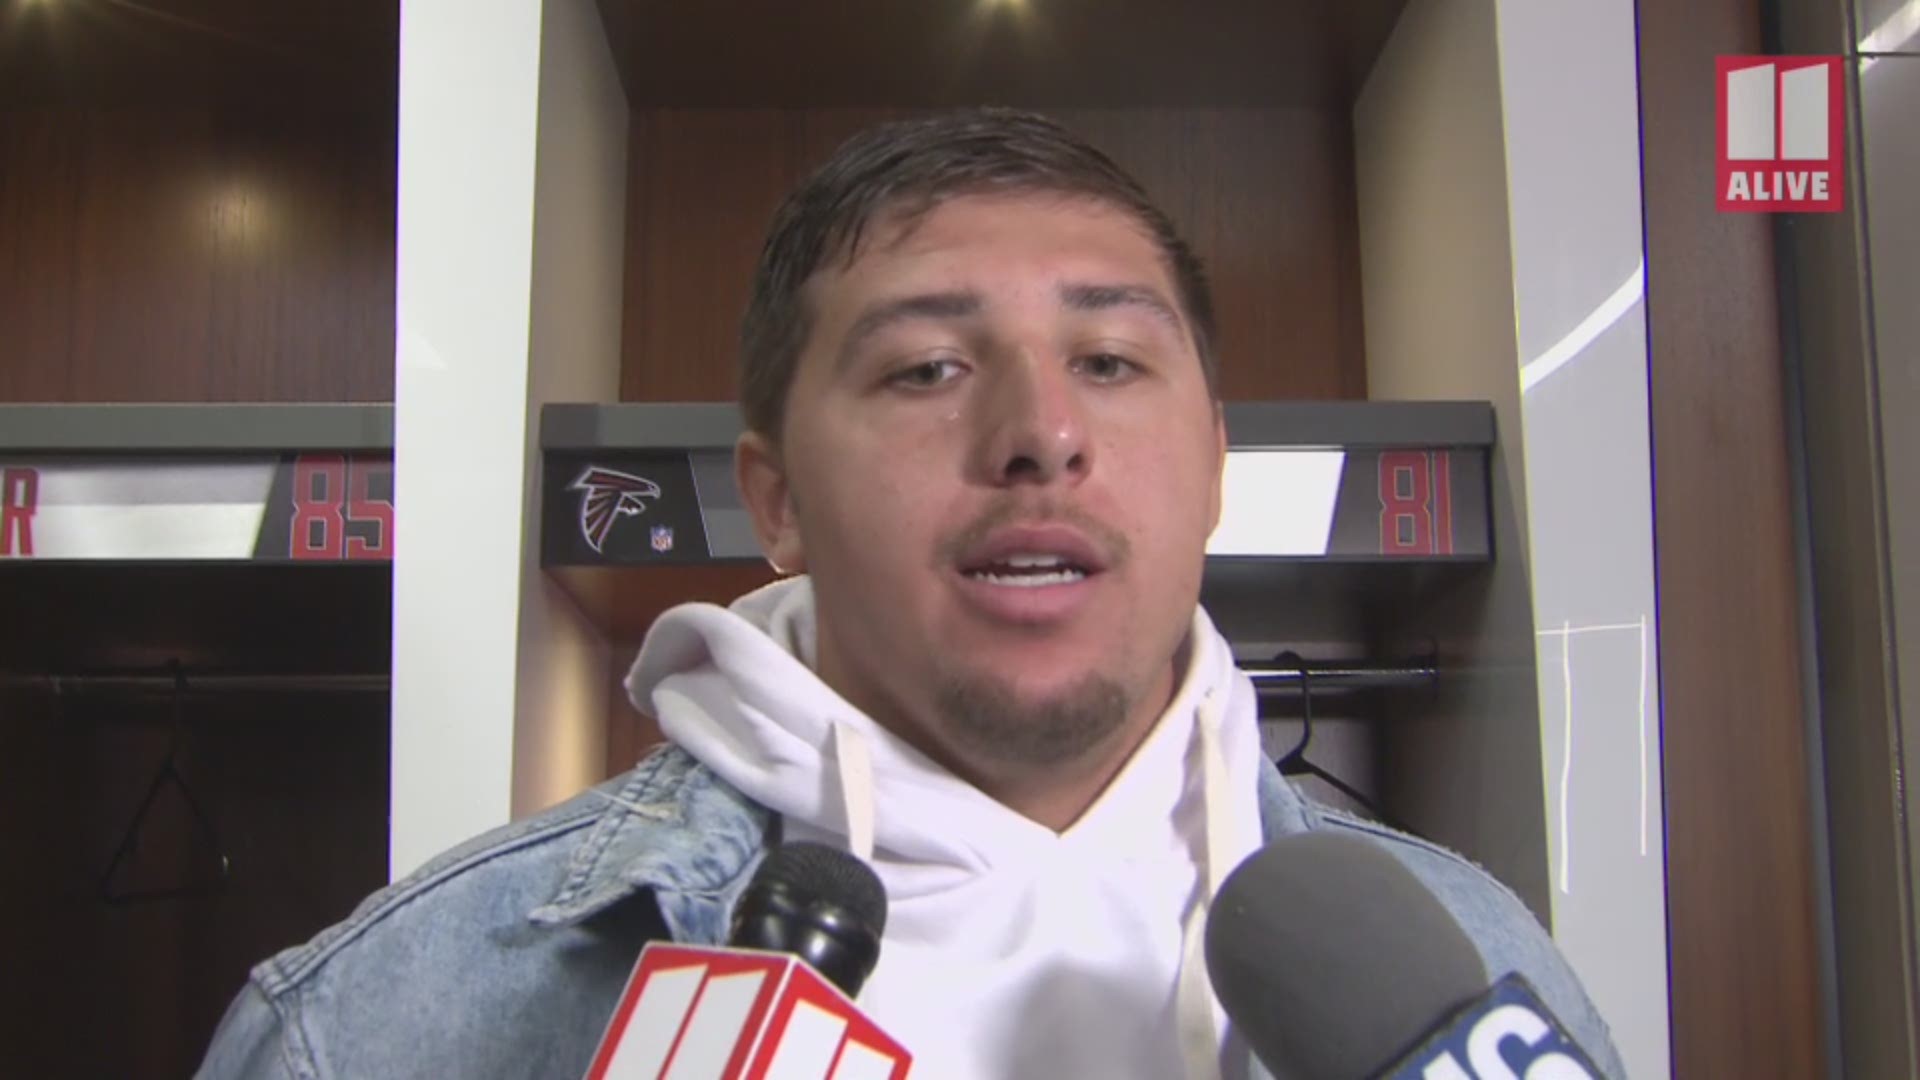 The Atlanta Falcons tight end talked about their win over the Jacksonville Jaguars during their final home game of the season.